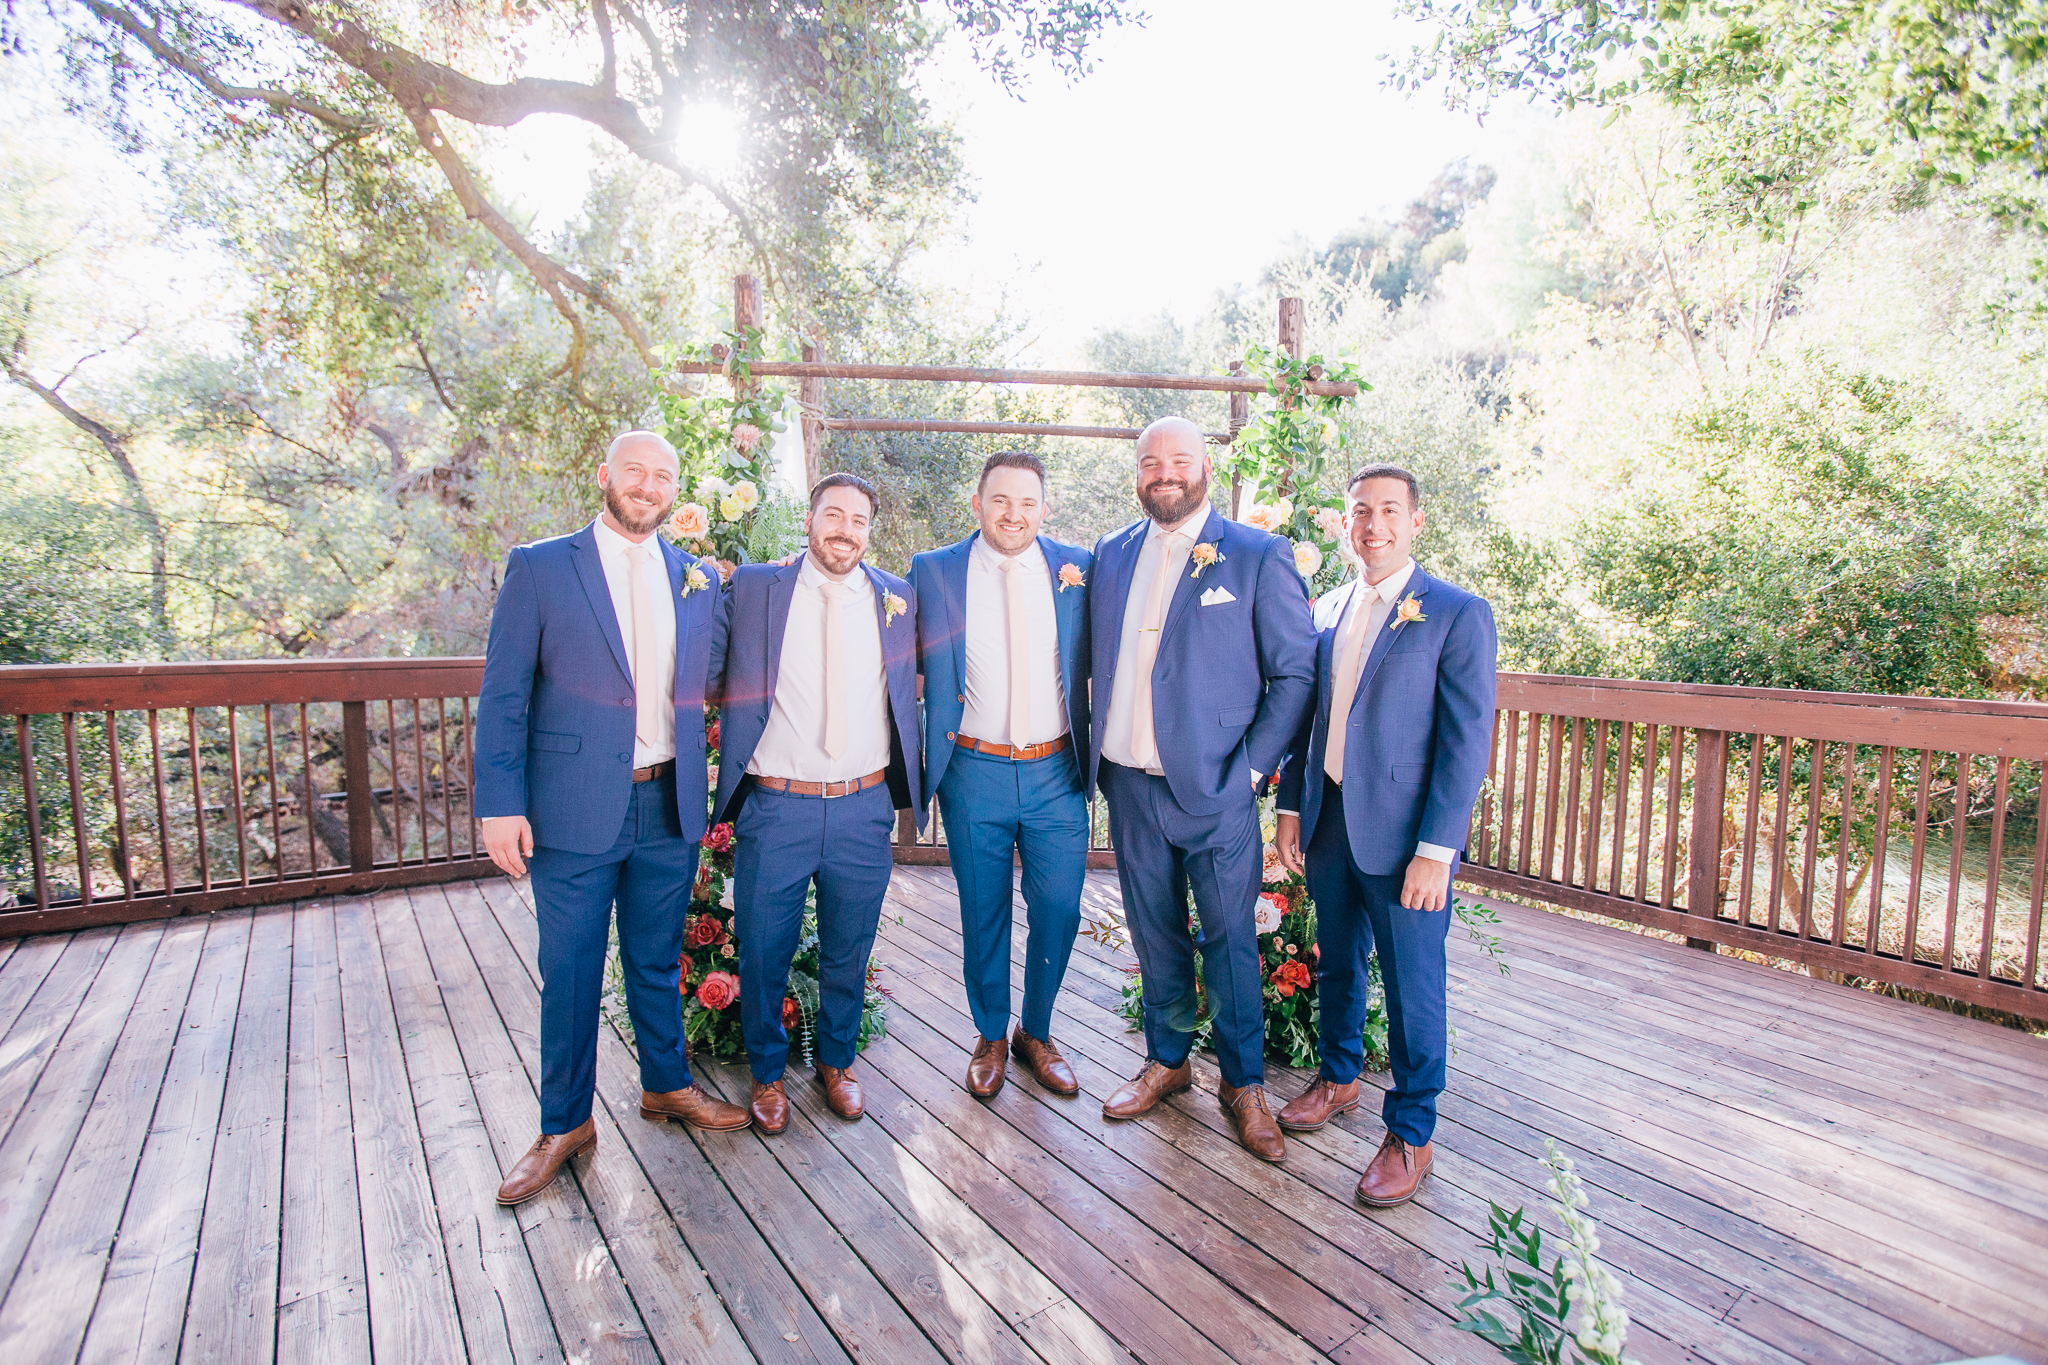 groom and groomsmen in blue suits with pink ties stand in front of wedding ceremony arch